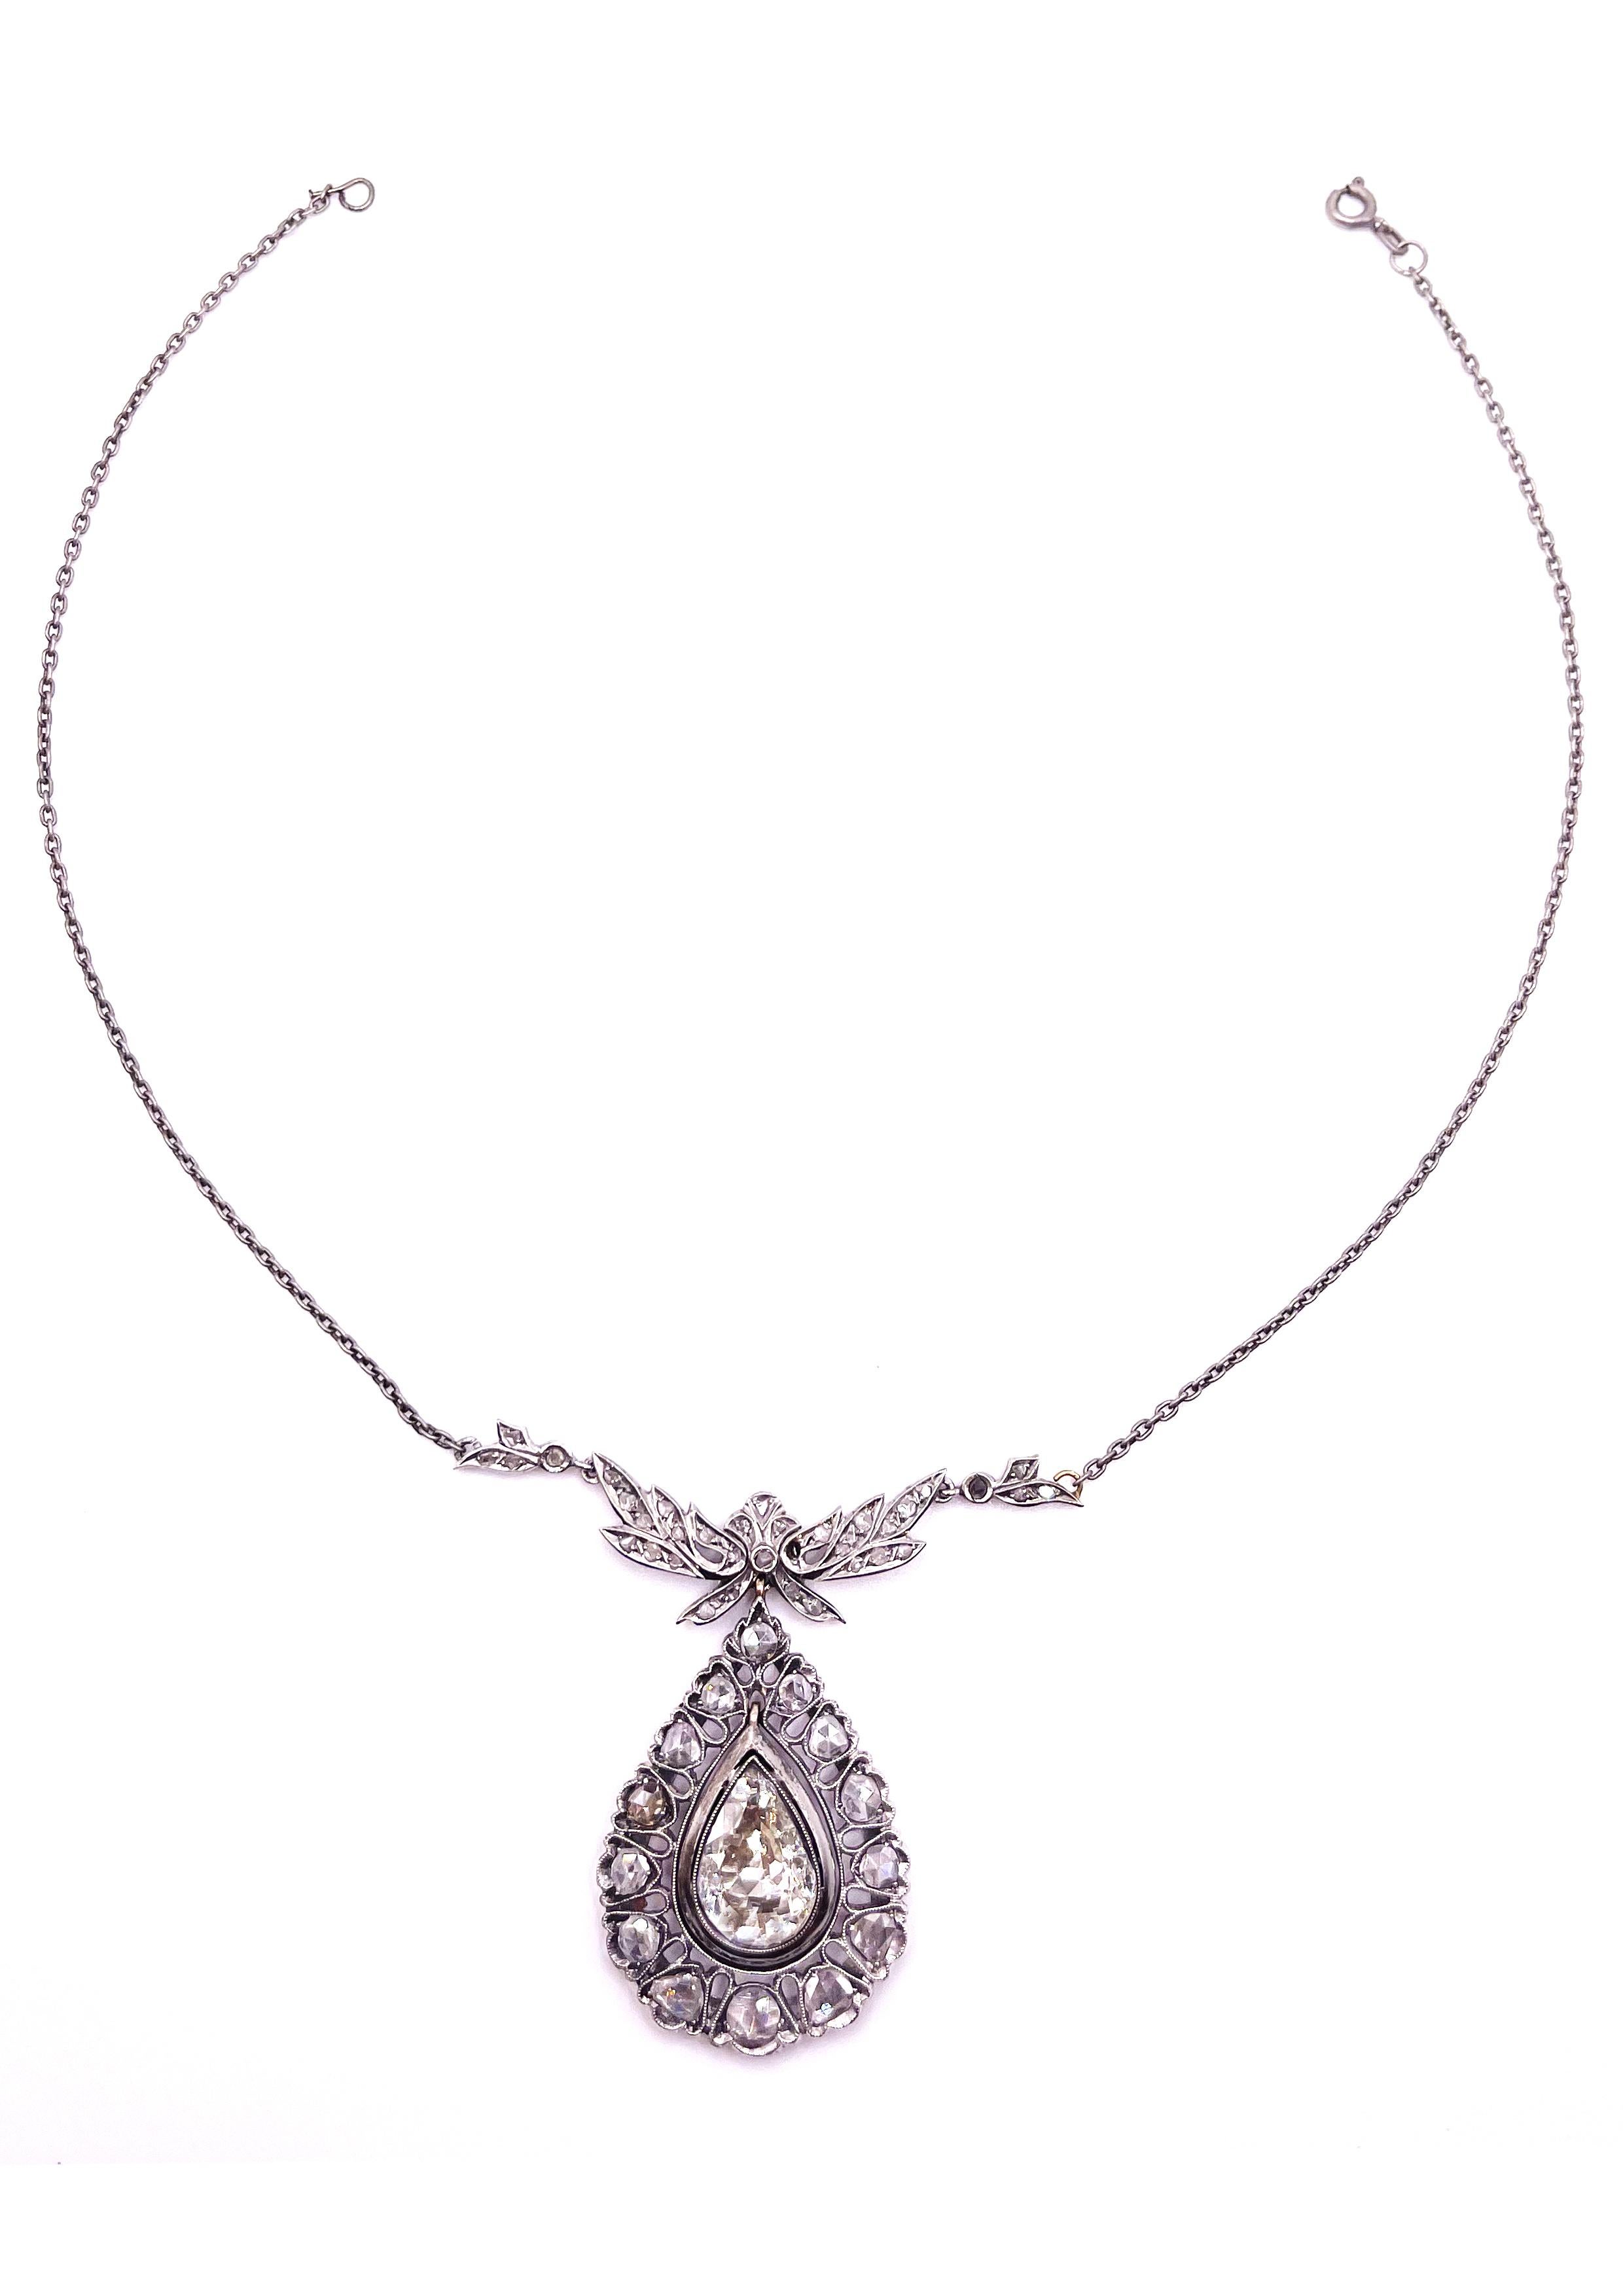 Antique 4.00 Carat Russian Rose Cut Diamond 14k & Silver Necklace In Excellent Condition For Sale In Firenze, FI